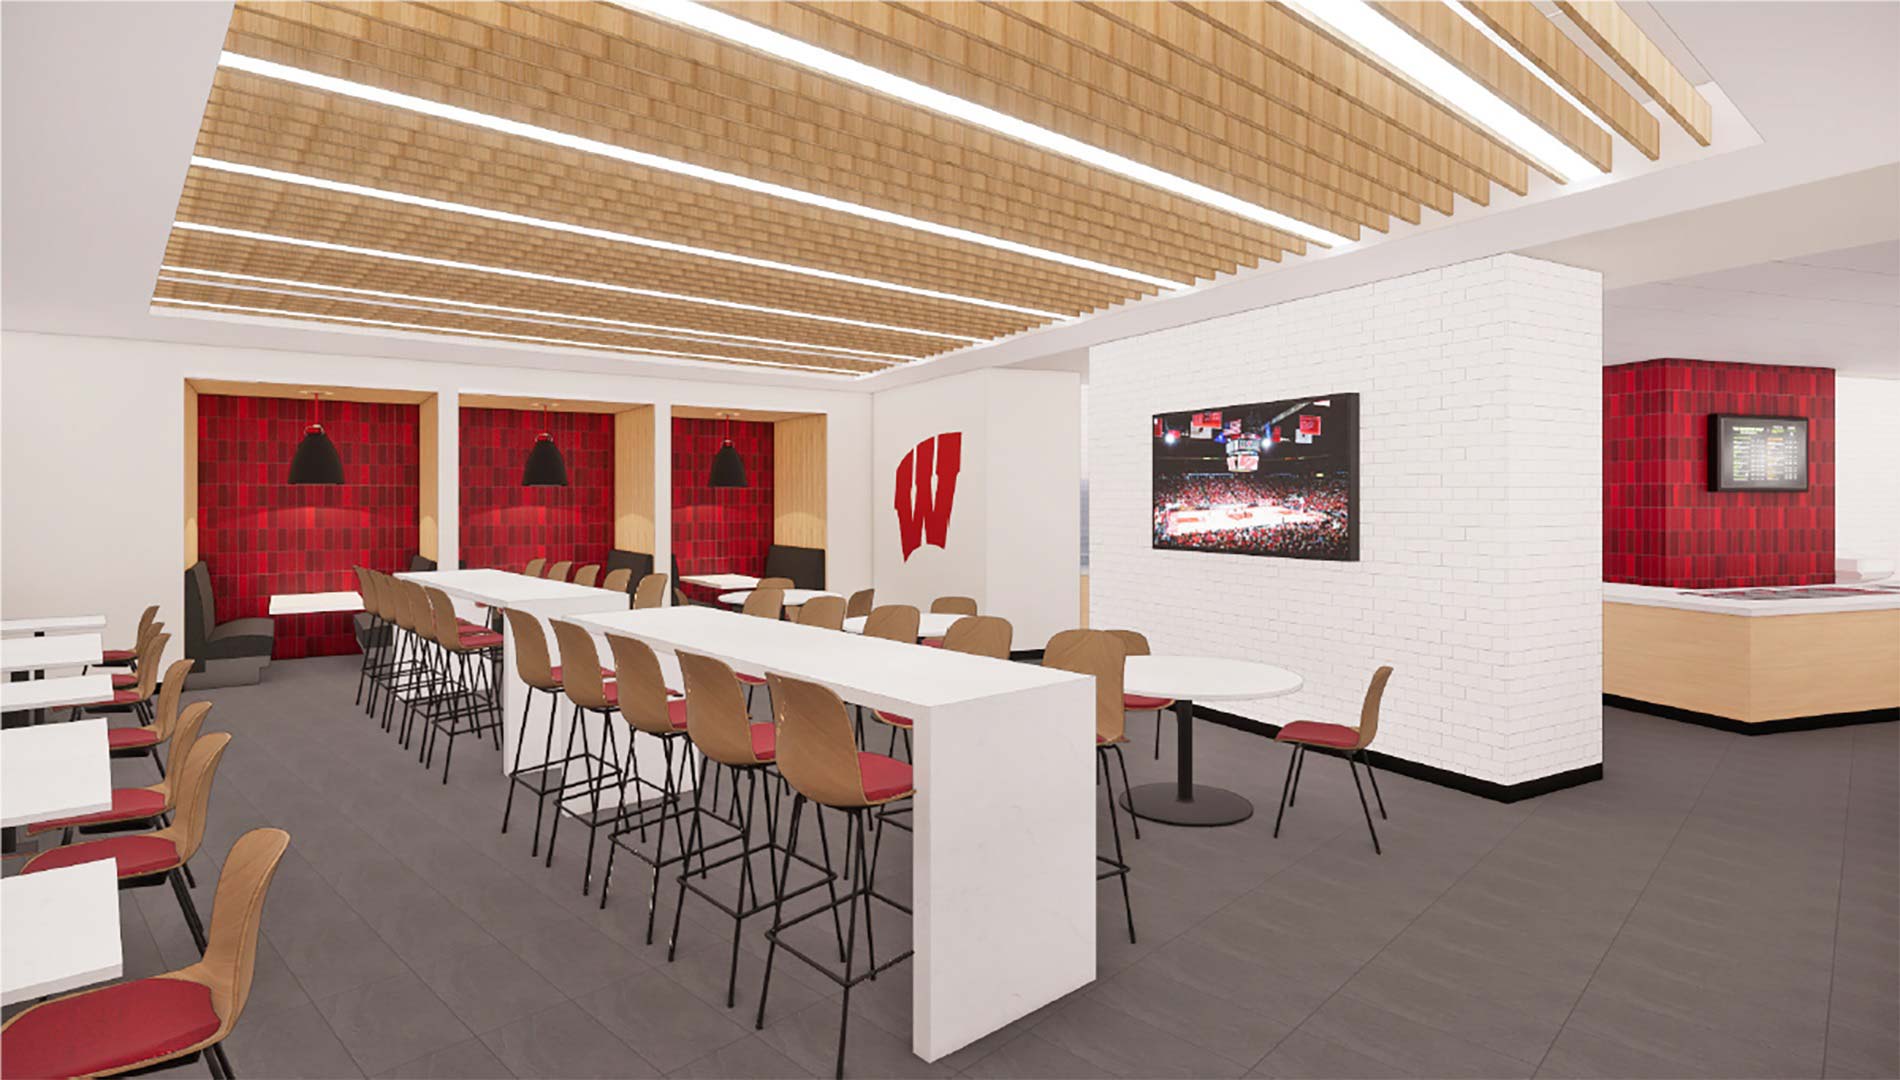 A rendering view of a dining area with tables, chairs, and booths with white walls, lighting, red accent walls.